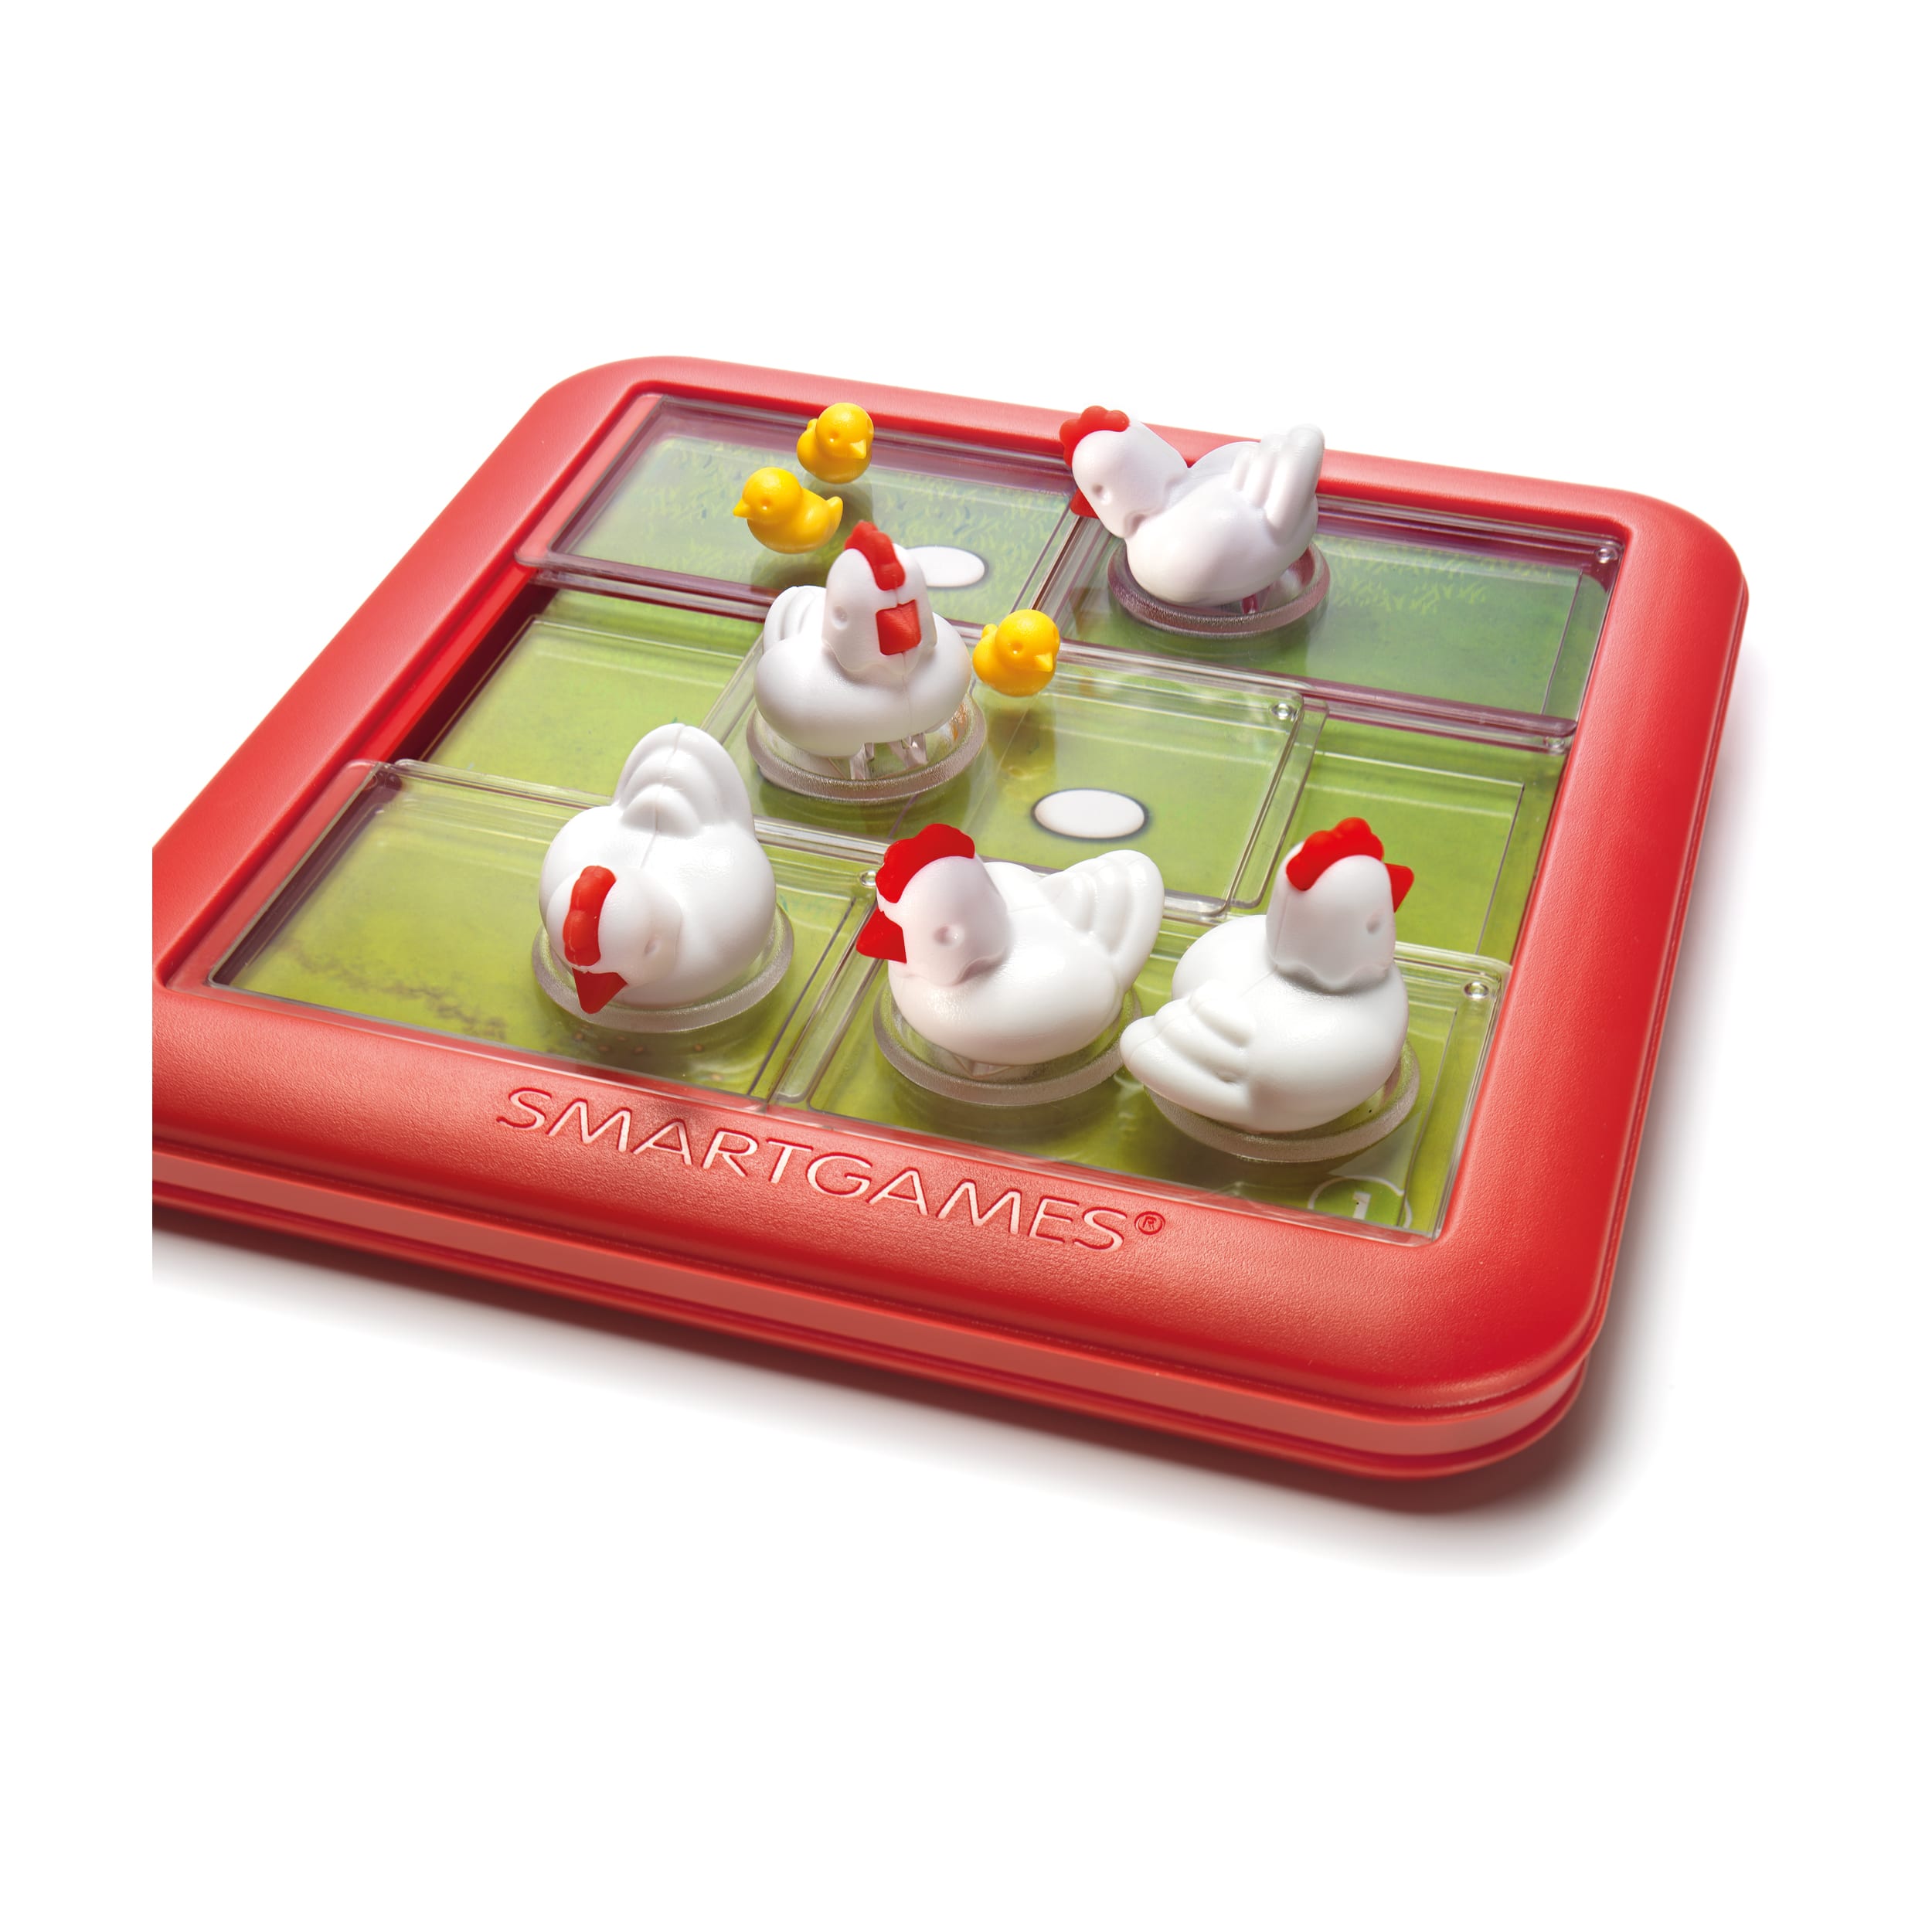 Chicken Shuffle Jr.&#x2122; 1 Player Puzzle Game